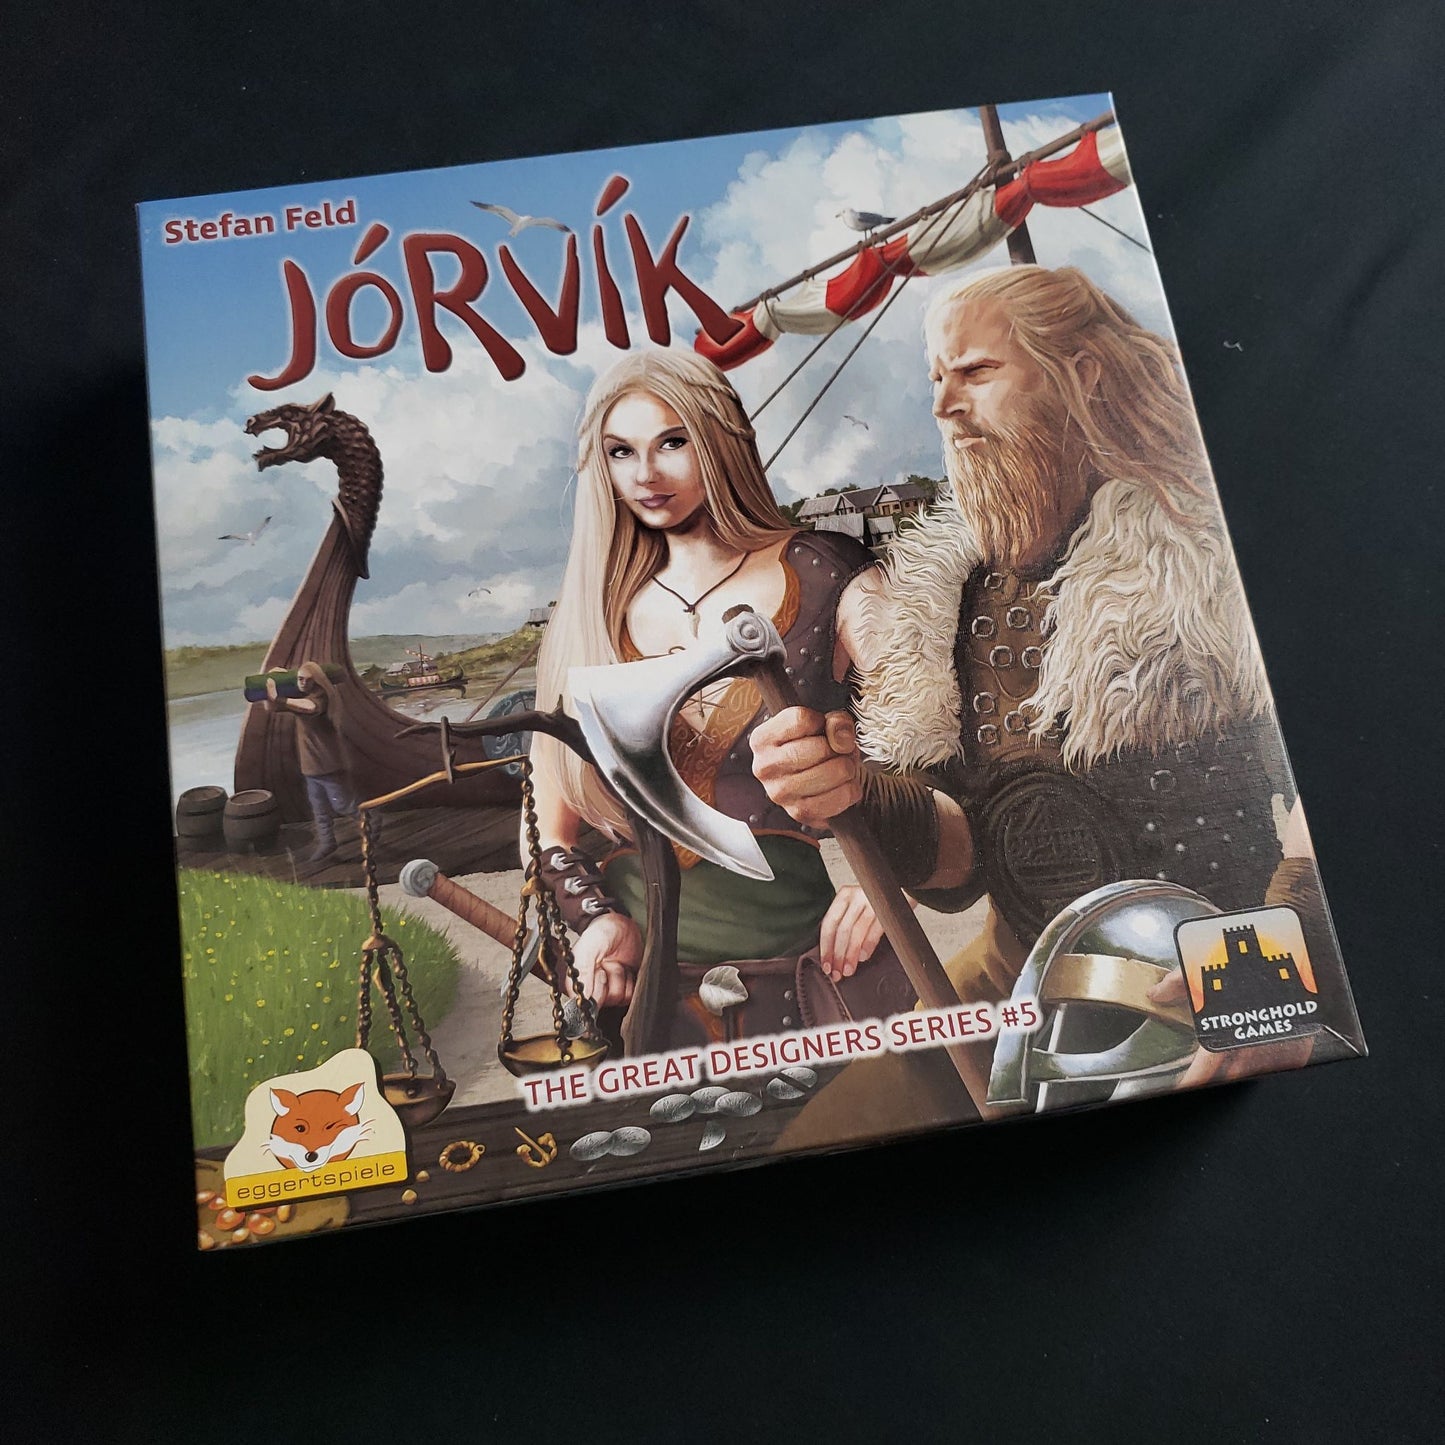 Jorvik board game - front cover of box